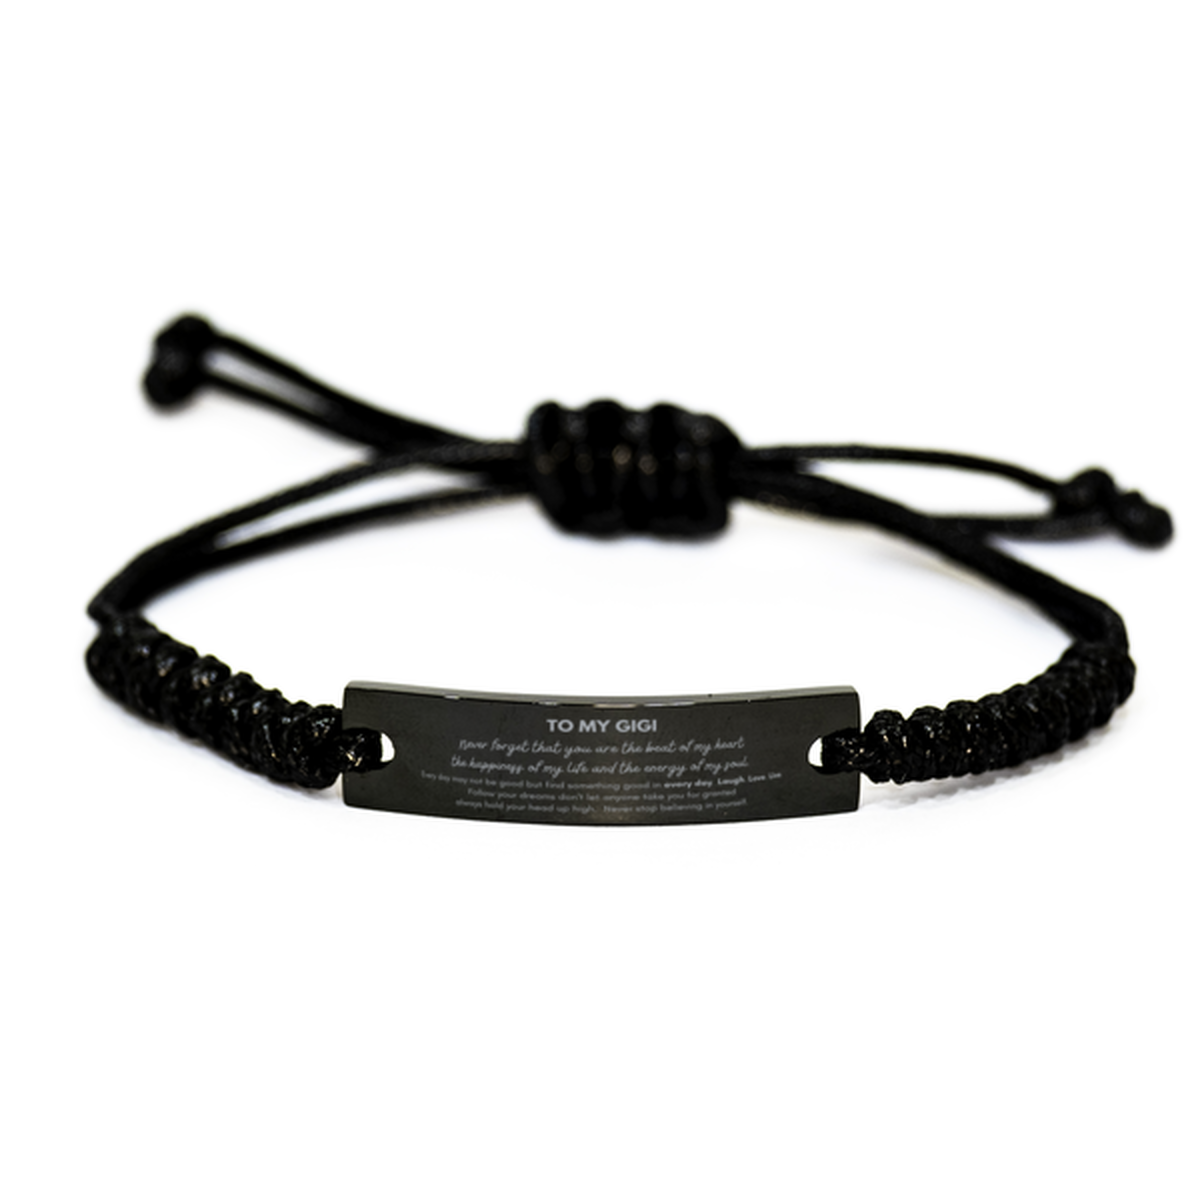 To My Gigi Bracelet Gifts, Christmas Gigi Black Rope Bracelet Present, Birthday Unique Motivational For Gigi, To My Gigi Never forget that you are the beat of my heart the happiness of my life and the energy of my soul